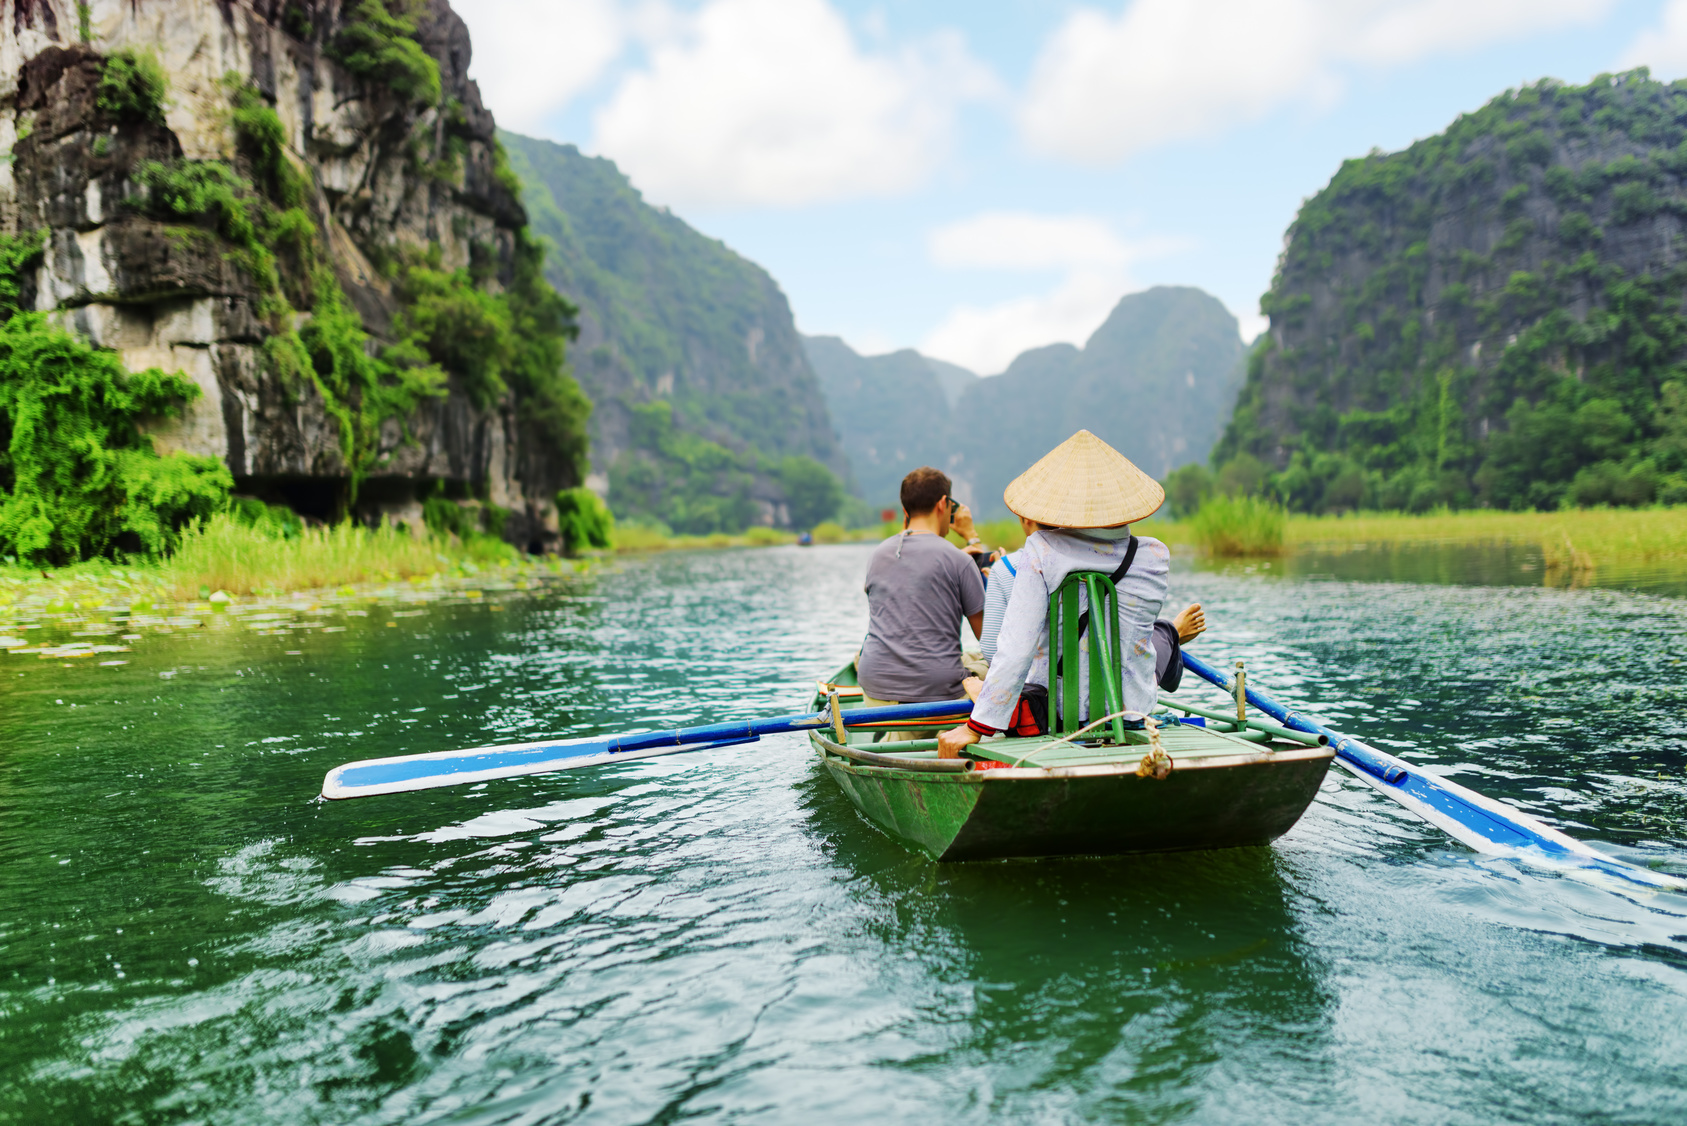 2023 Guide Vietnam Visa from Thailand - Everything You Need to Know